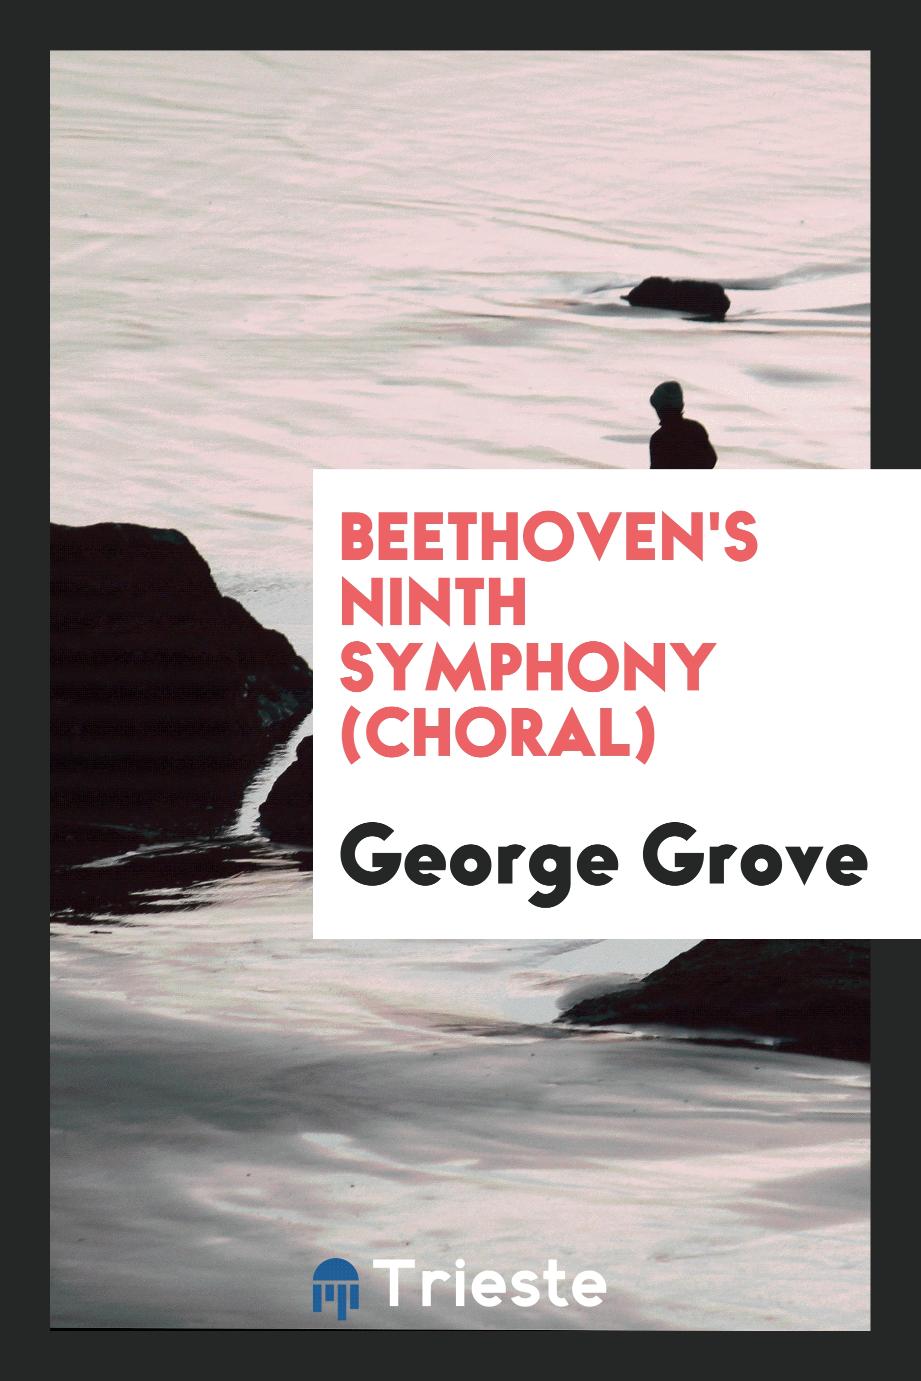 Beethoven's Ninth Symphony (choral)